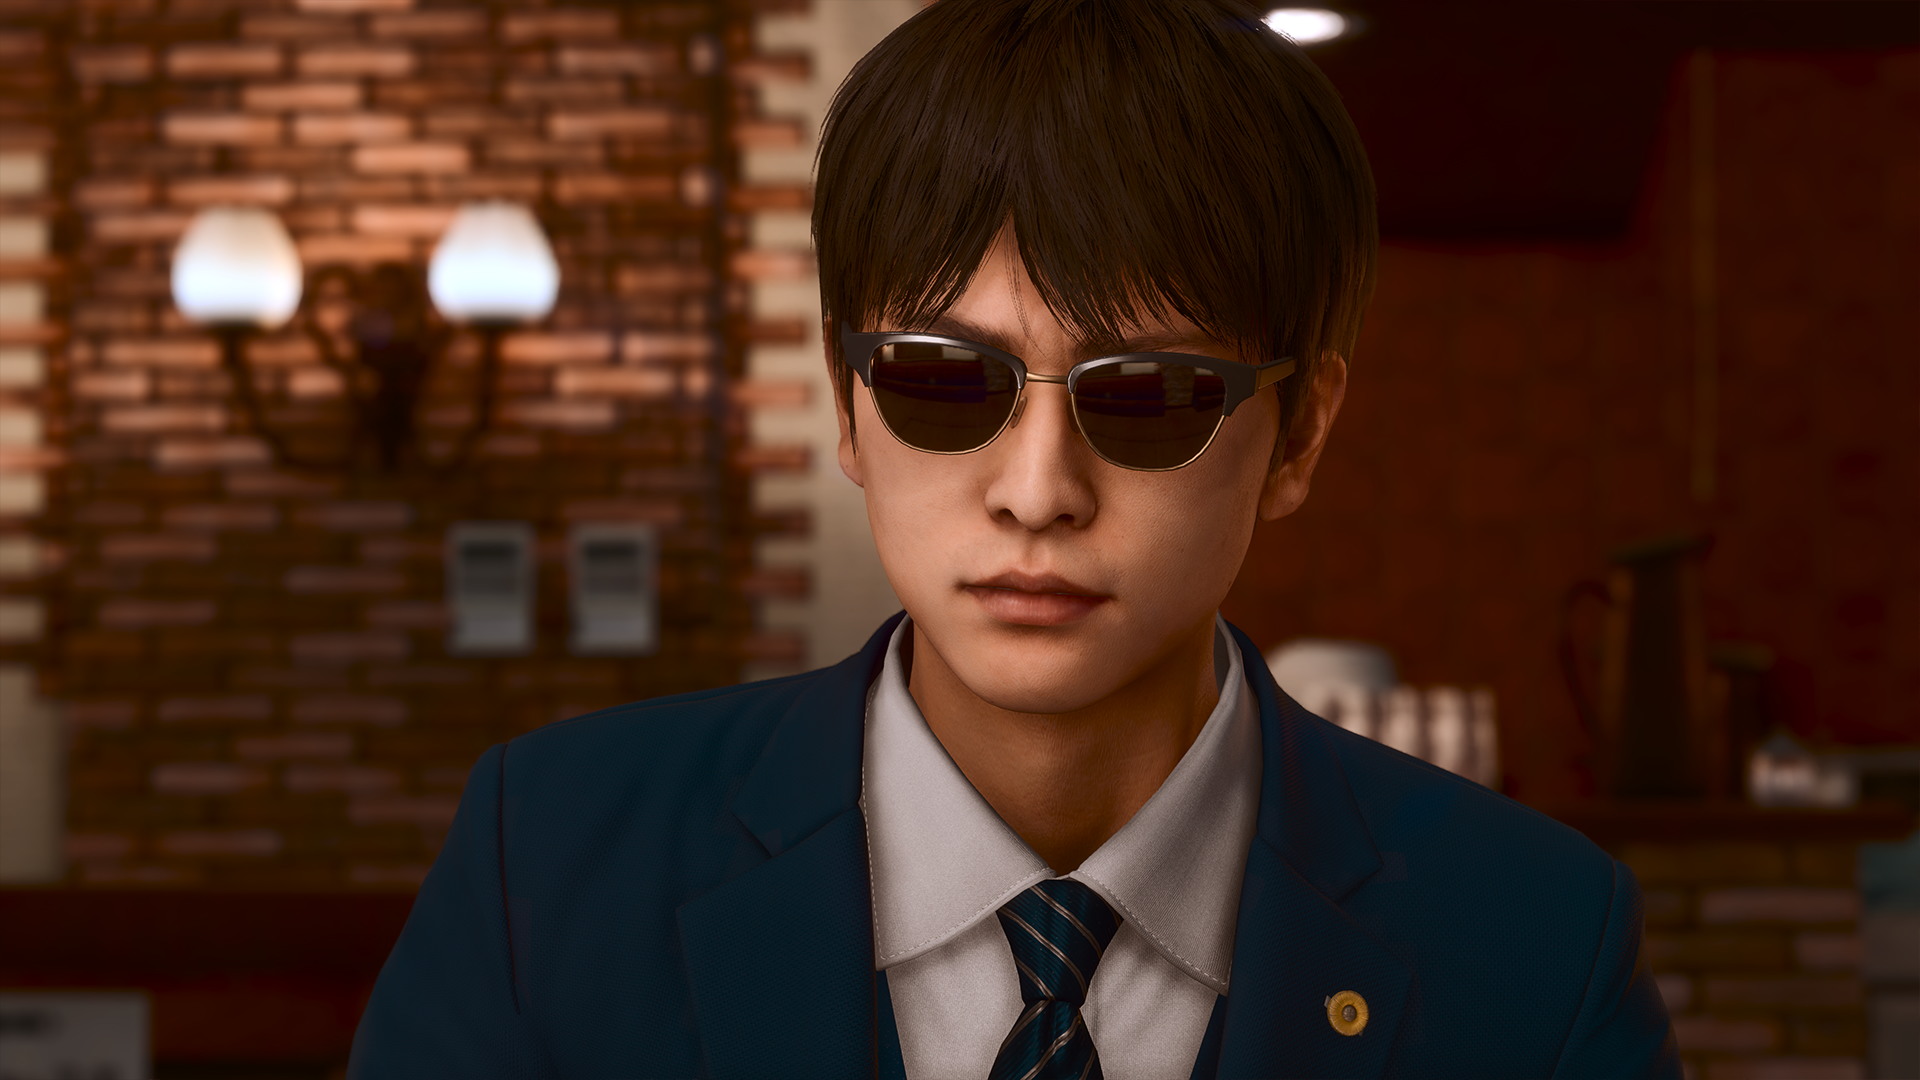 Lost Judgment: The Kaito Files Story Expansion - screenshot 13